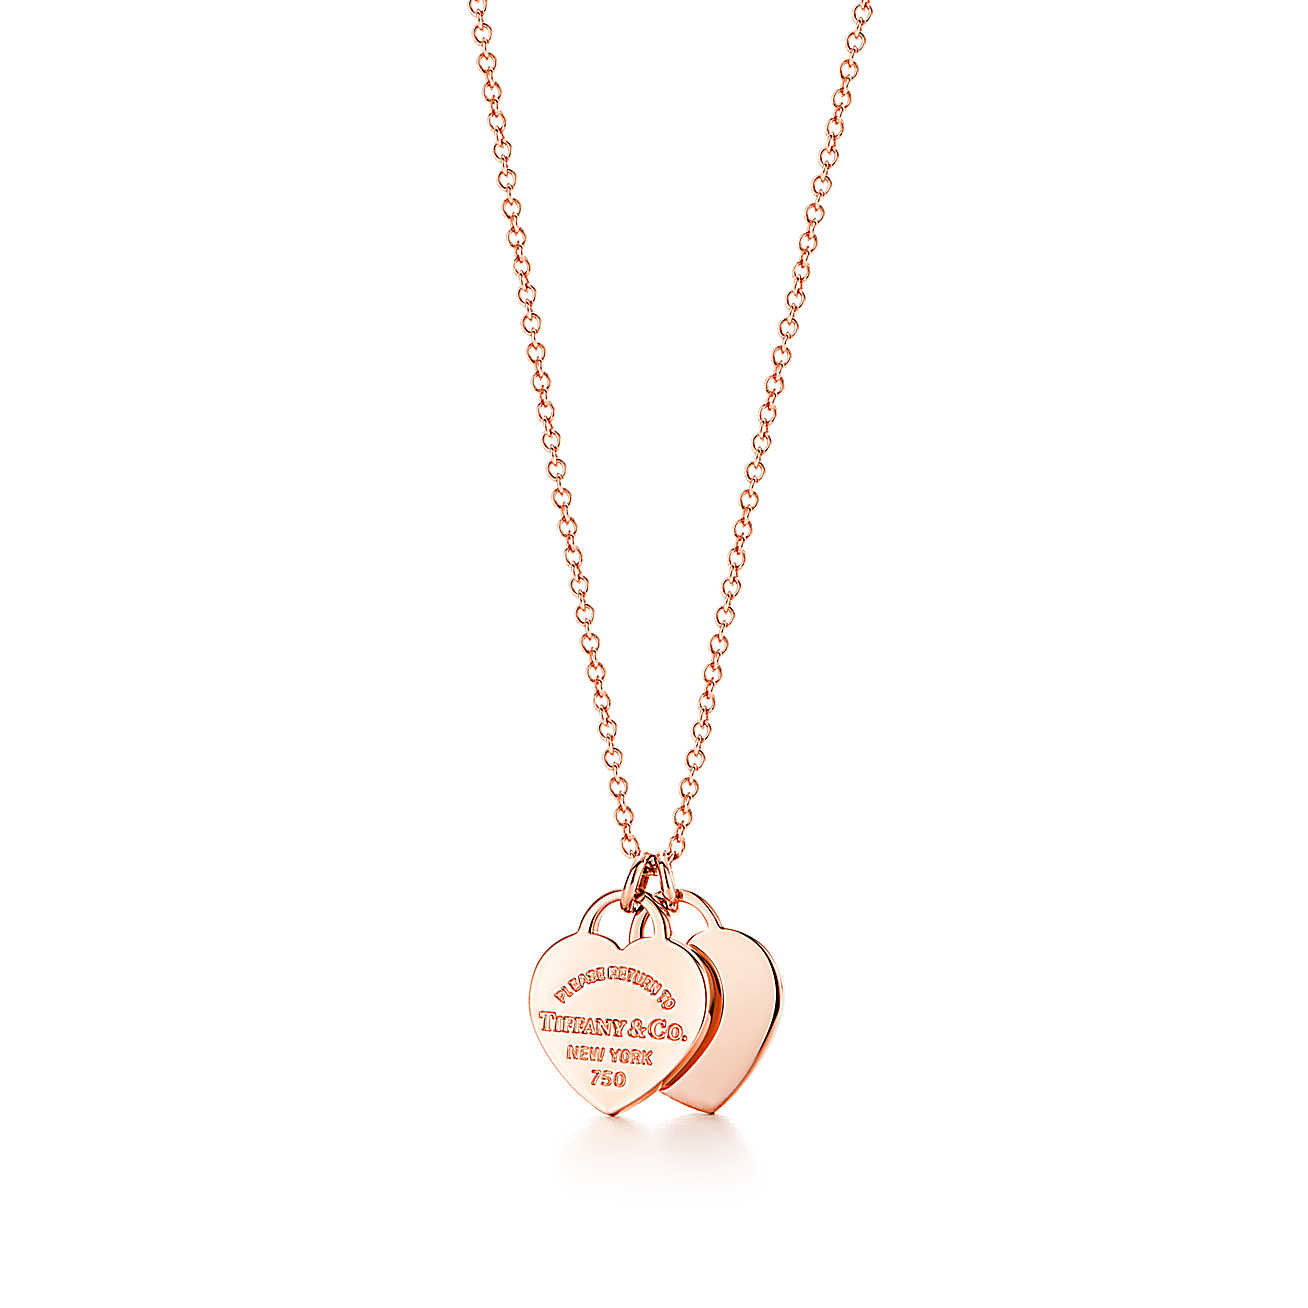 Tiffany Necklaces Under 200
 Return to Tiffany™ double heart pendant in 18k rose gold